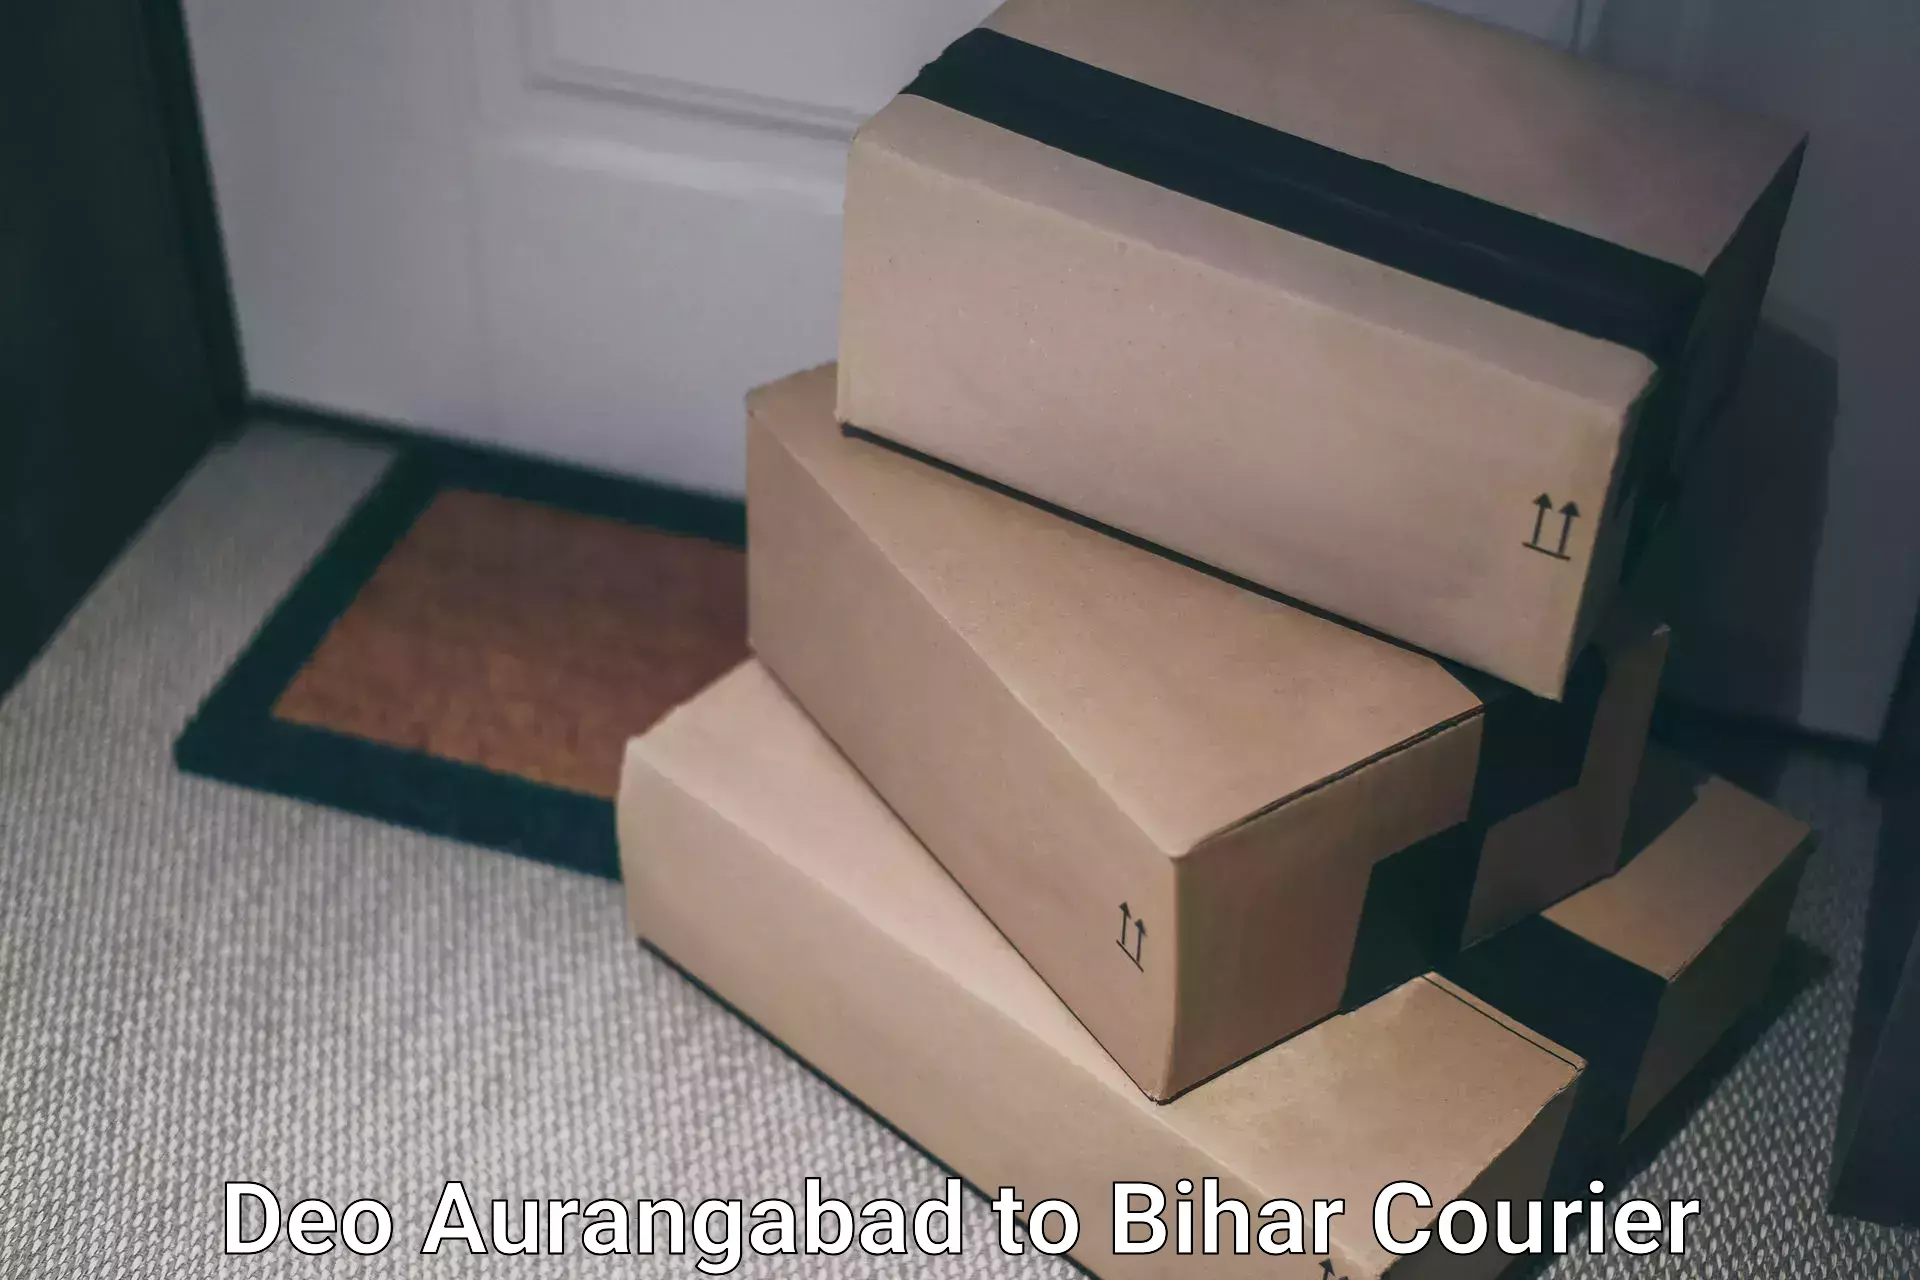 State-of-the-art courier technology Deo Aurangabad to Saharsa